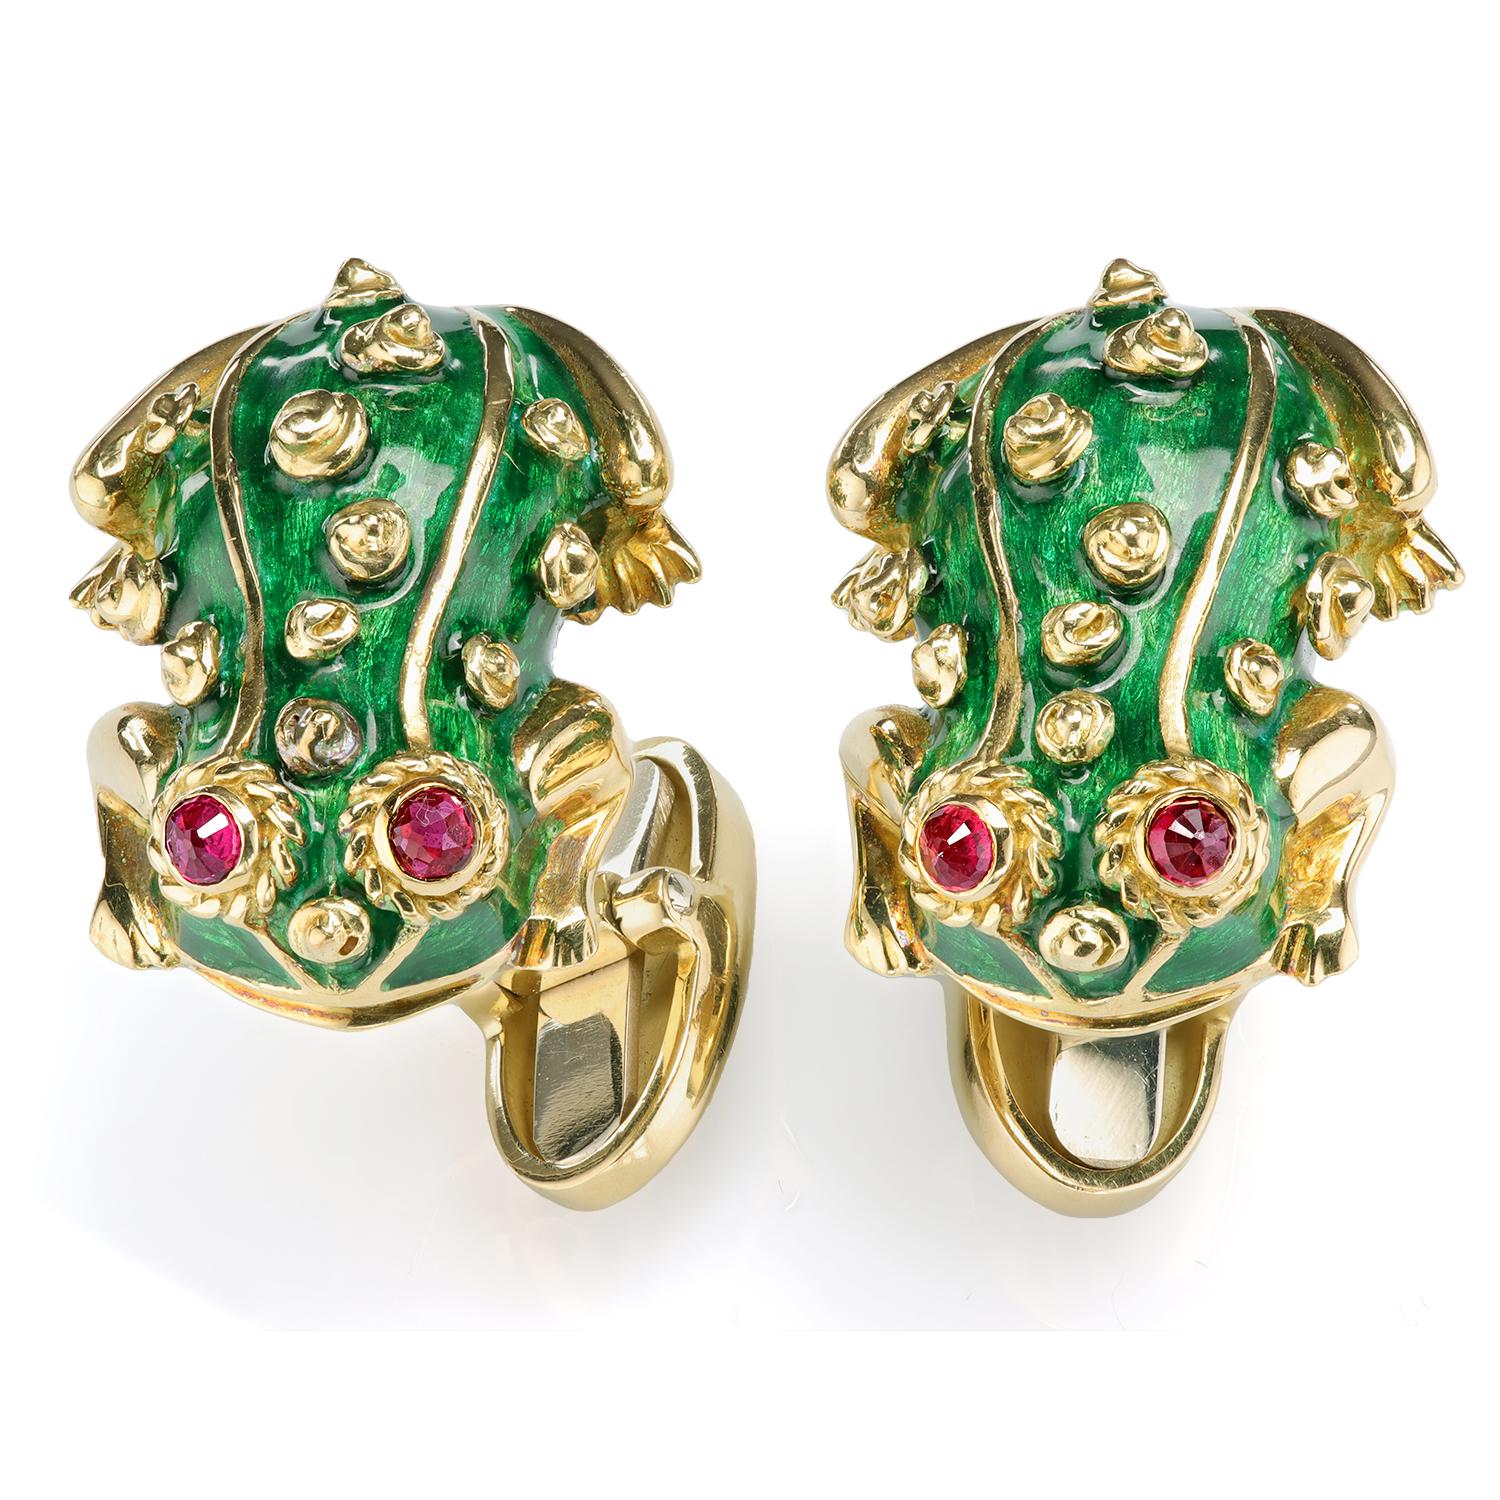 Green Enamel Cufflinks With Ruby Cabochon eyes
Details:
Measurements: 24.0 mm x 18.0 mm x 7.0 mm
Weight: 28.3 grams